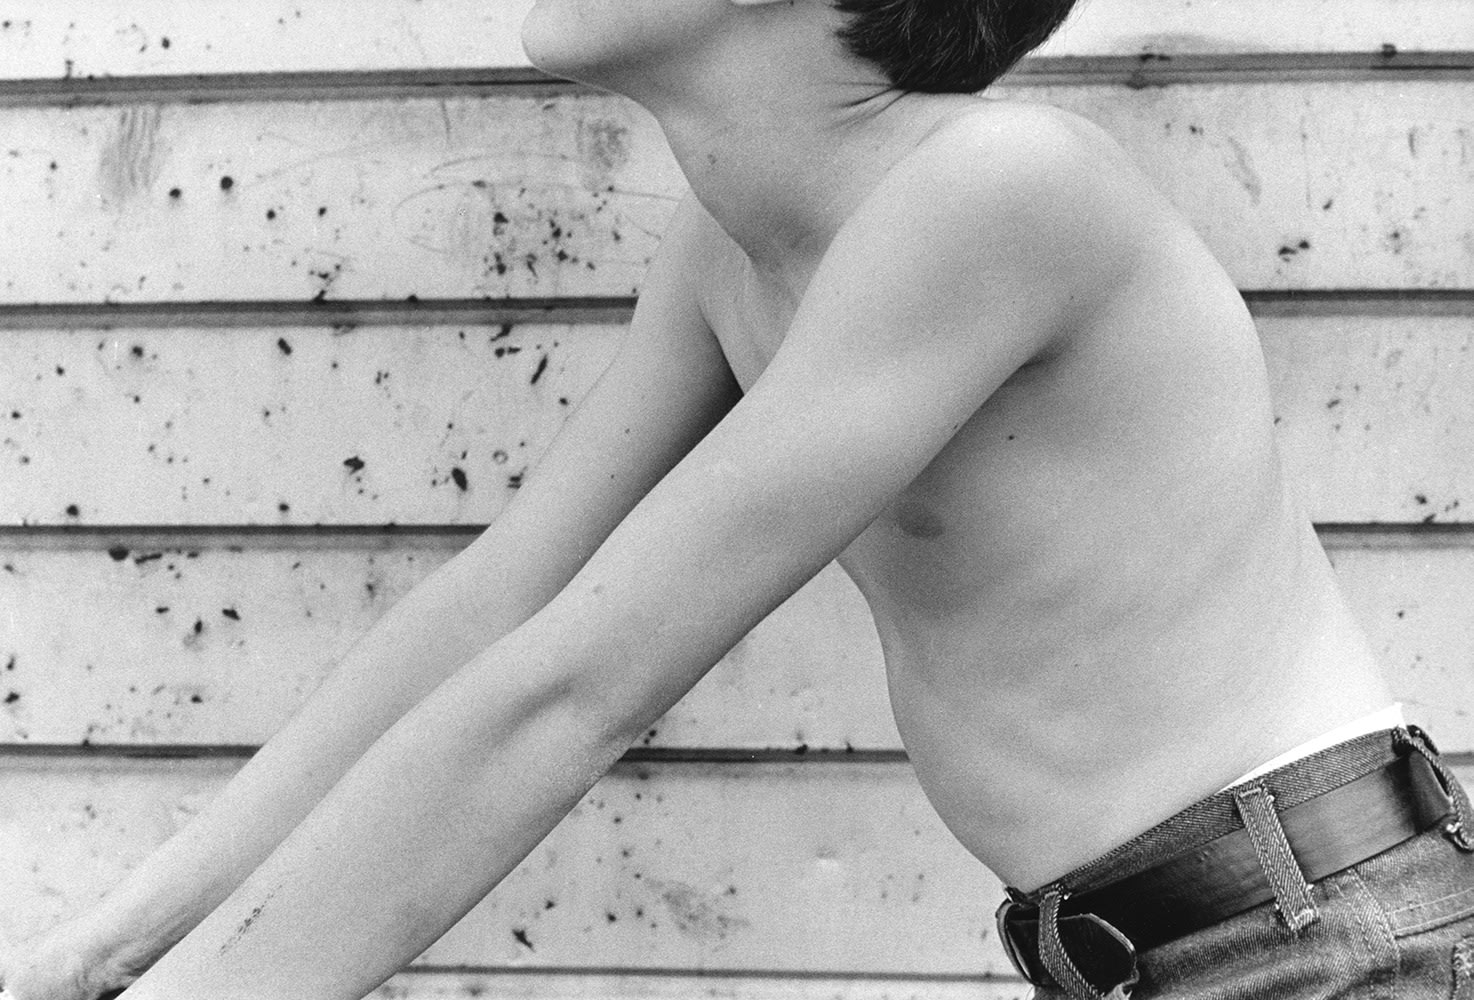 Bare Thin Arms and Aluminum Siding, 1981, 16 x 20 inches